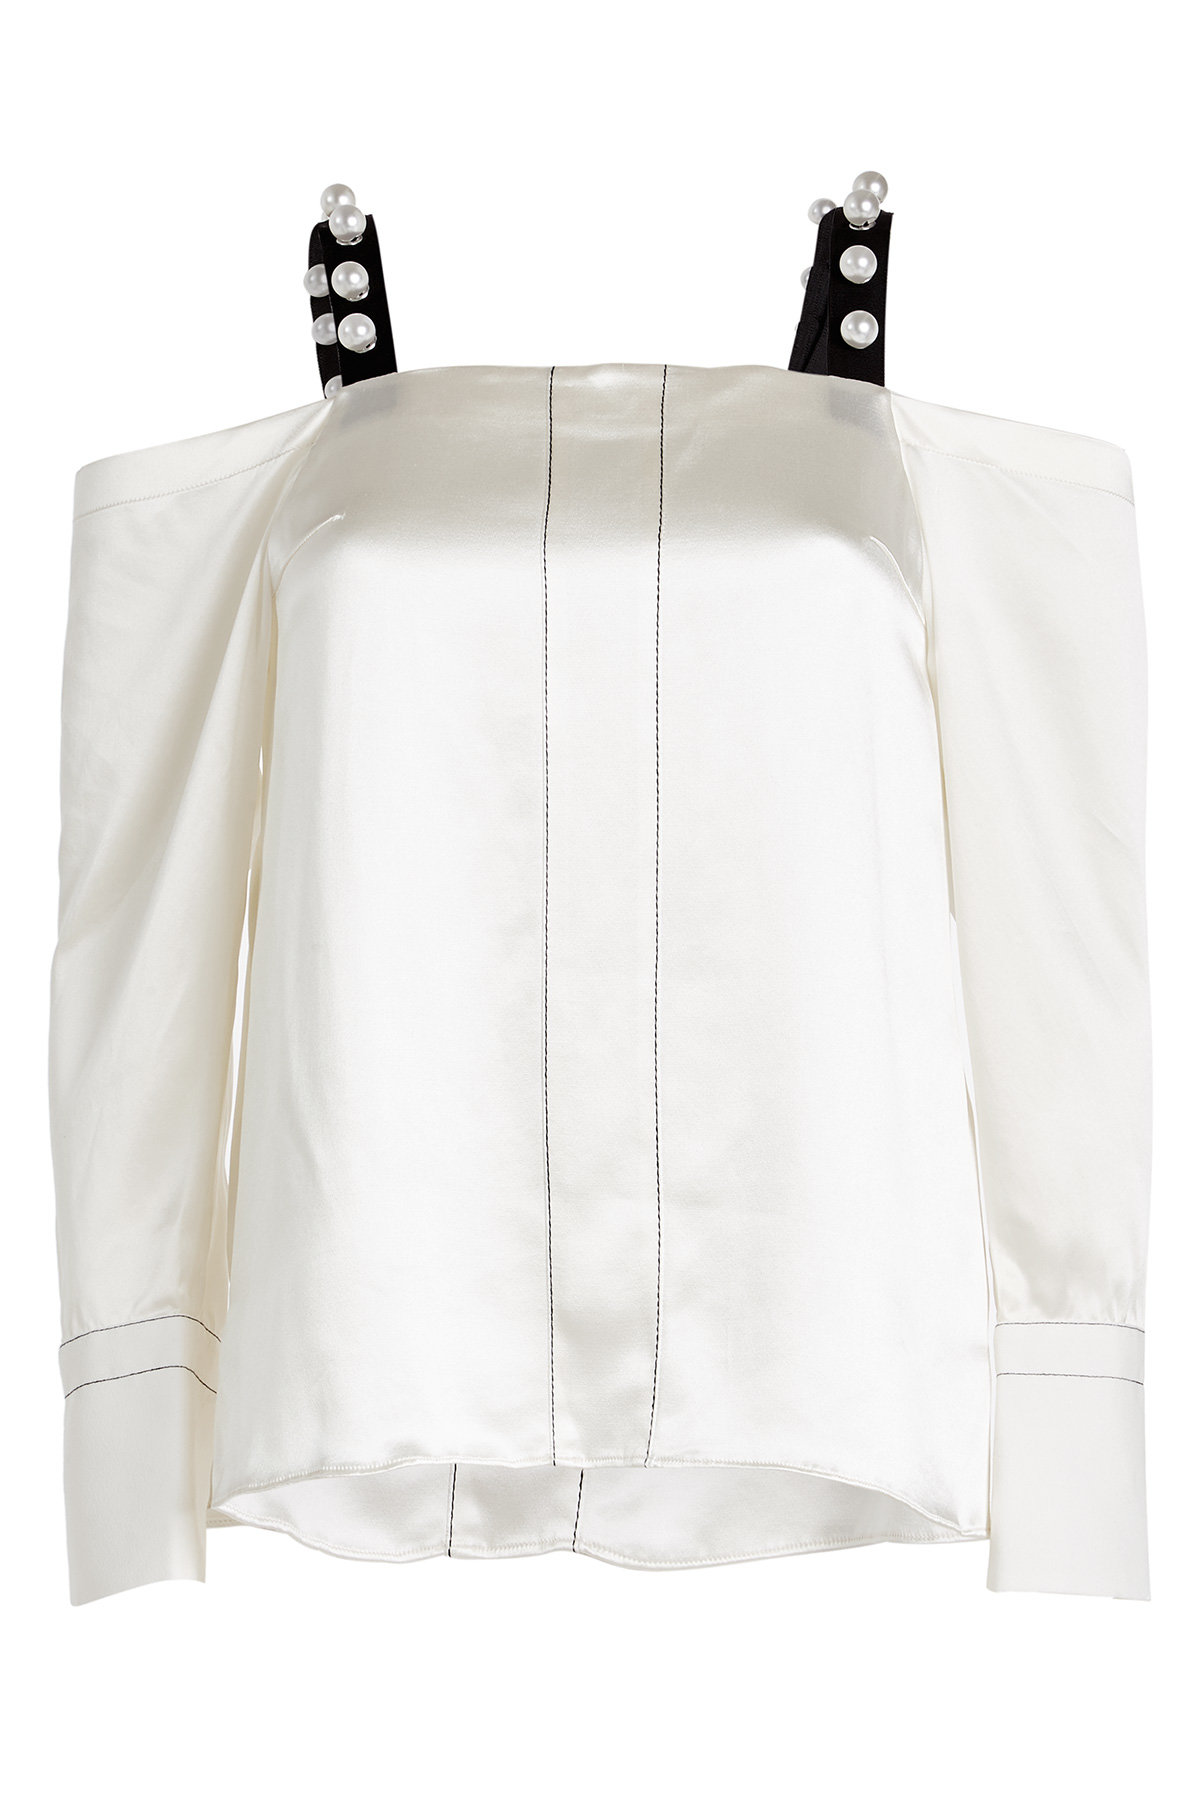 3.1 Phillip Lim - Silk Off-Shoulder Blouse with Faux Pearls